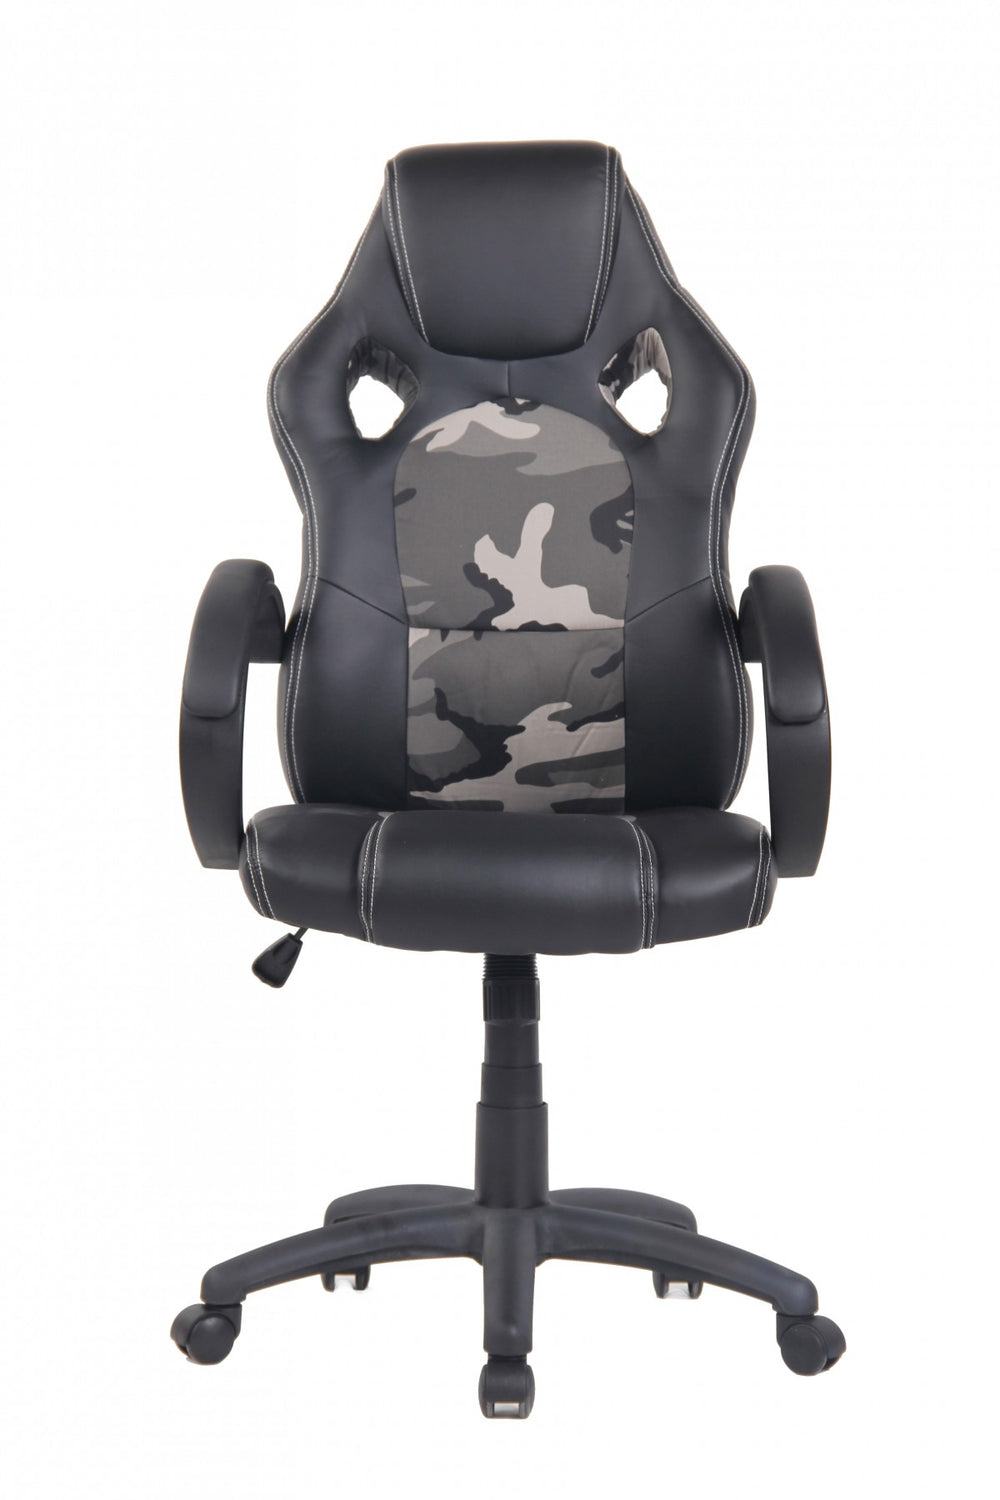 Premium Gaming Chair in Black/Camo - Adjustable Height, Fixed Armrest, Tilt Mechanism, and 5 Dual Castors for Office Comfort and Style